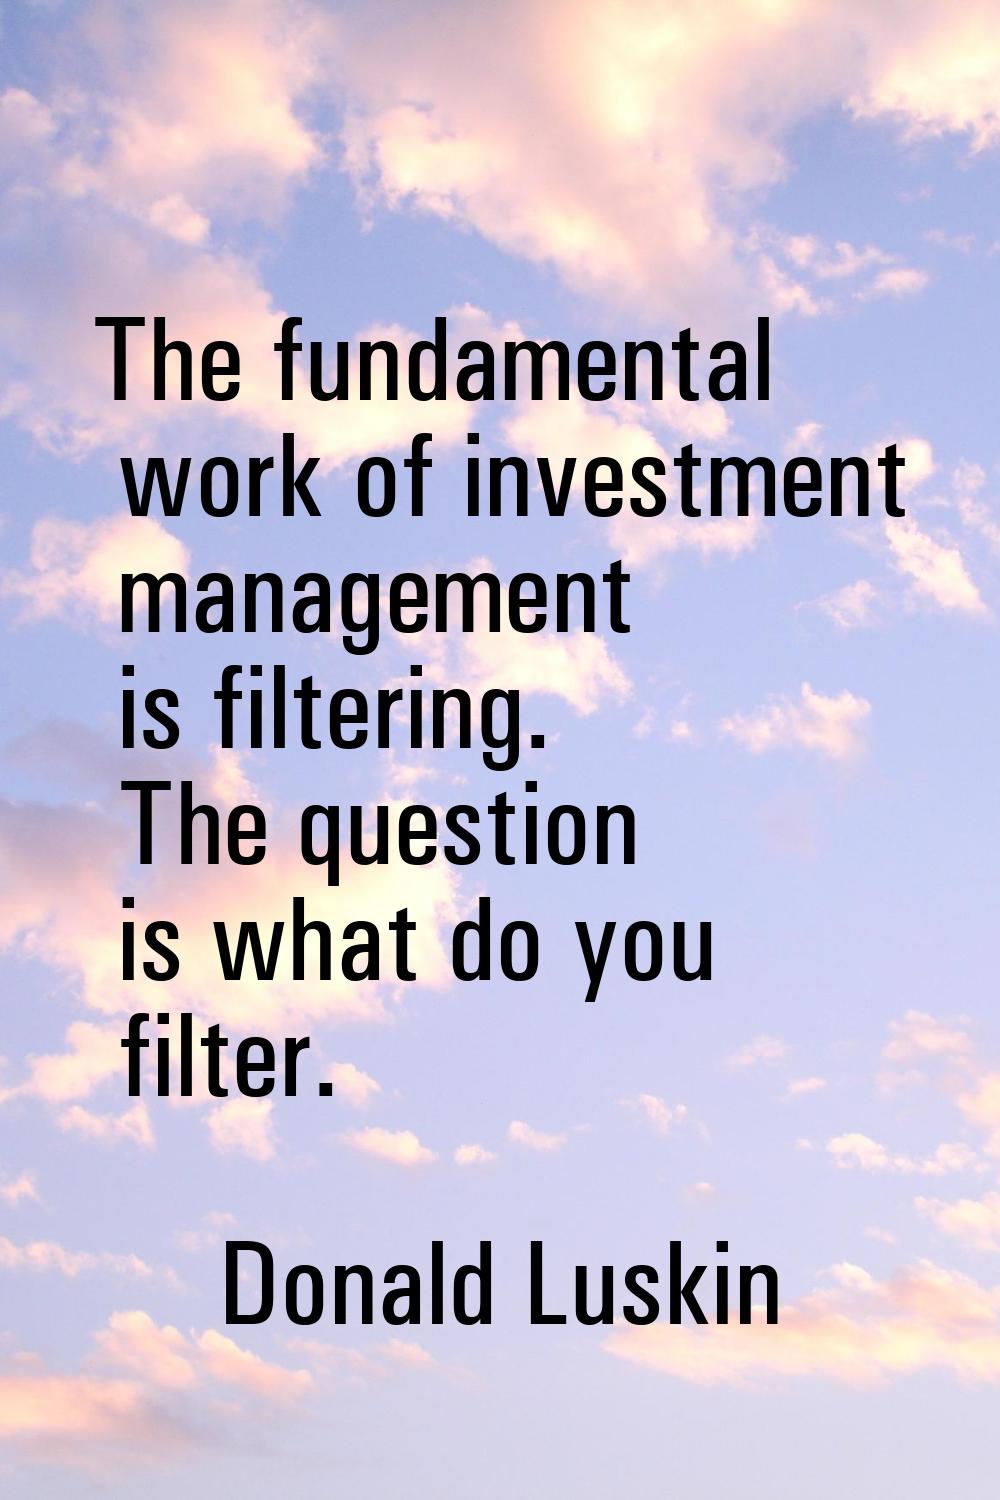 The fundamental work of investment management is filtering. The question is what do you filter.